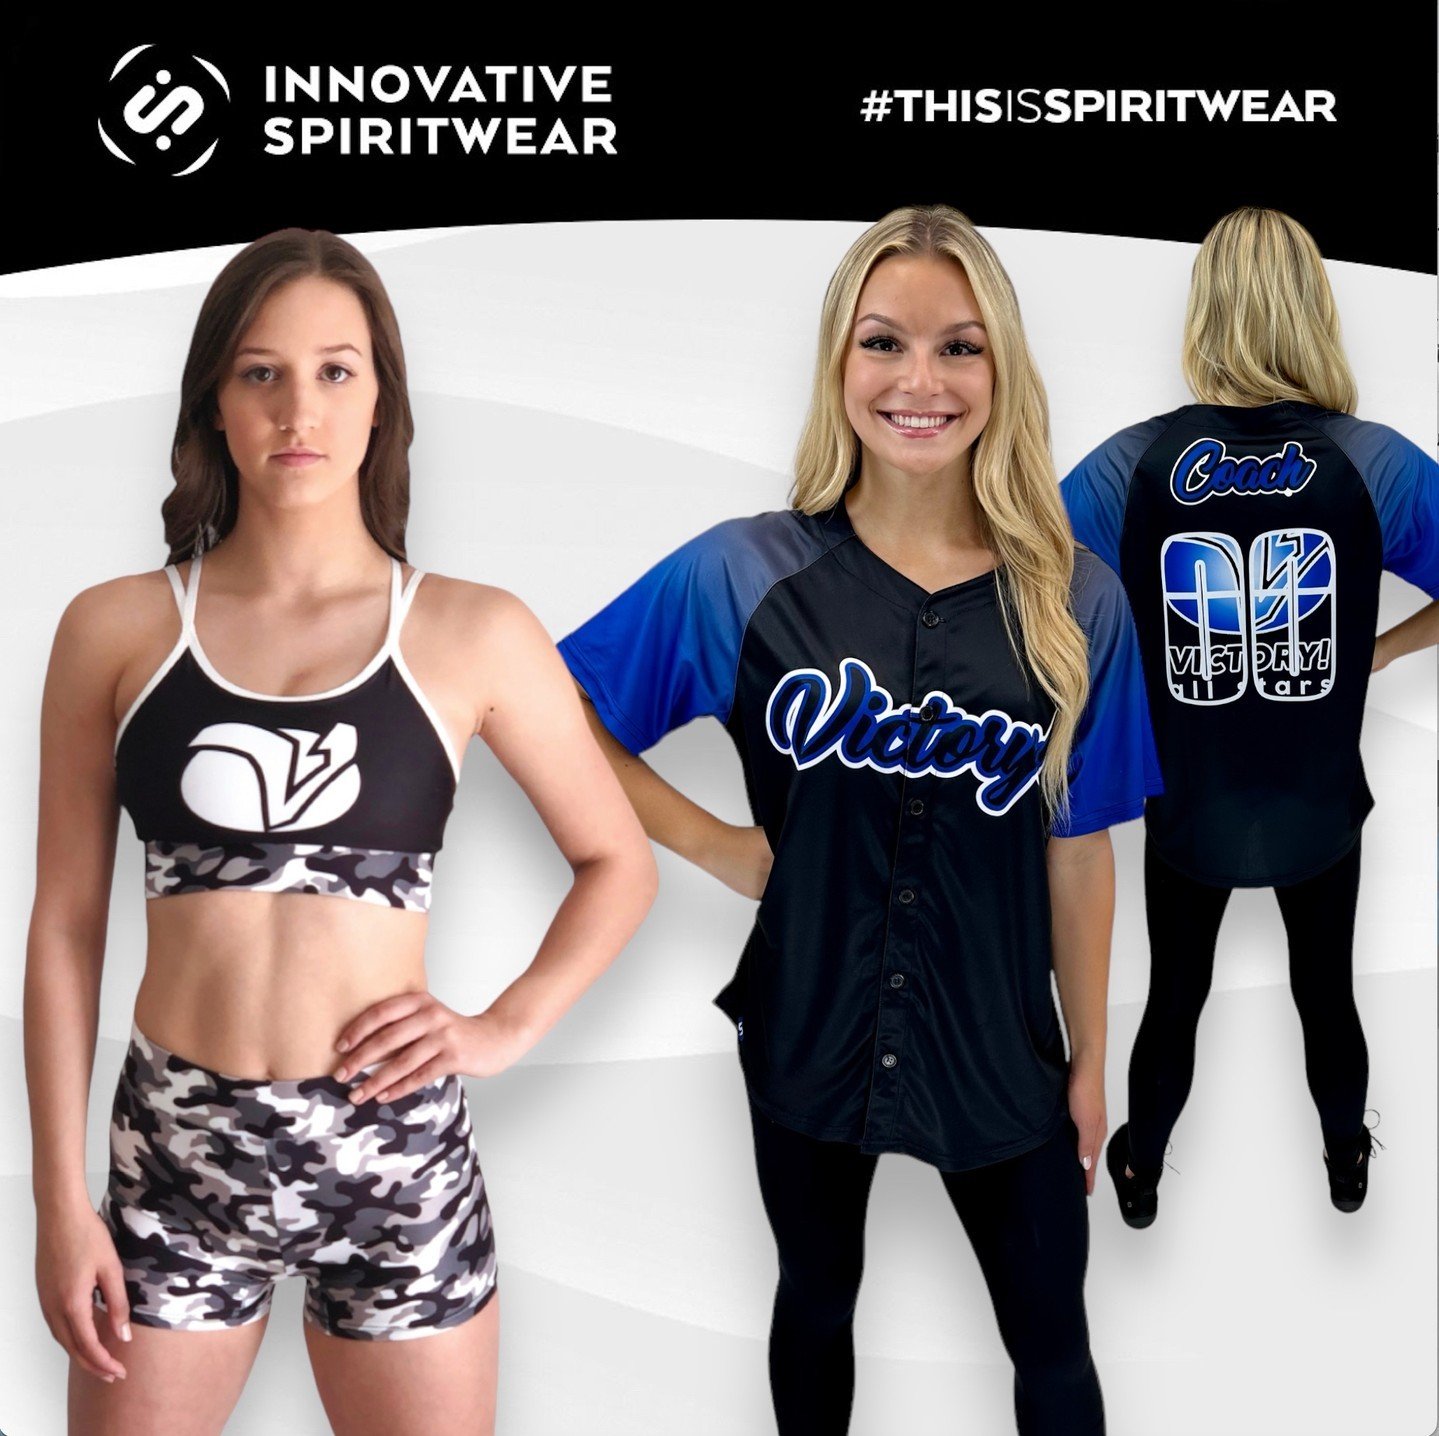 The New Season Trio Package
Any Bra Top, Any Short &amp; Any Jersey ONLY $89

Add $12 If Choosing Any Tank Top
Add $14 If Choosing Any Skirt Or Flutter Short 

MUST be ordered by June 14th.

Choose to be INNOVATIVE this season. Send us a message at h